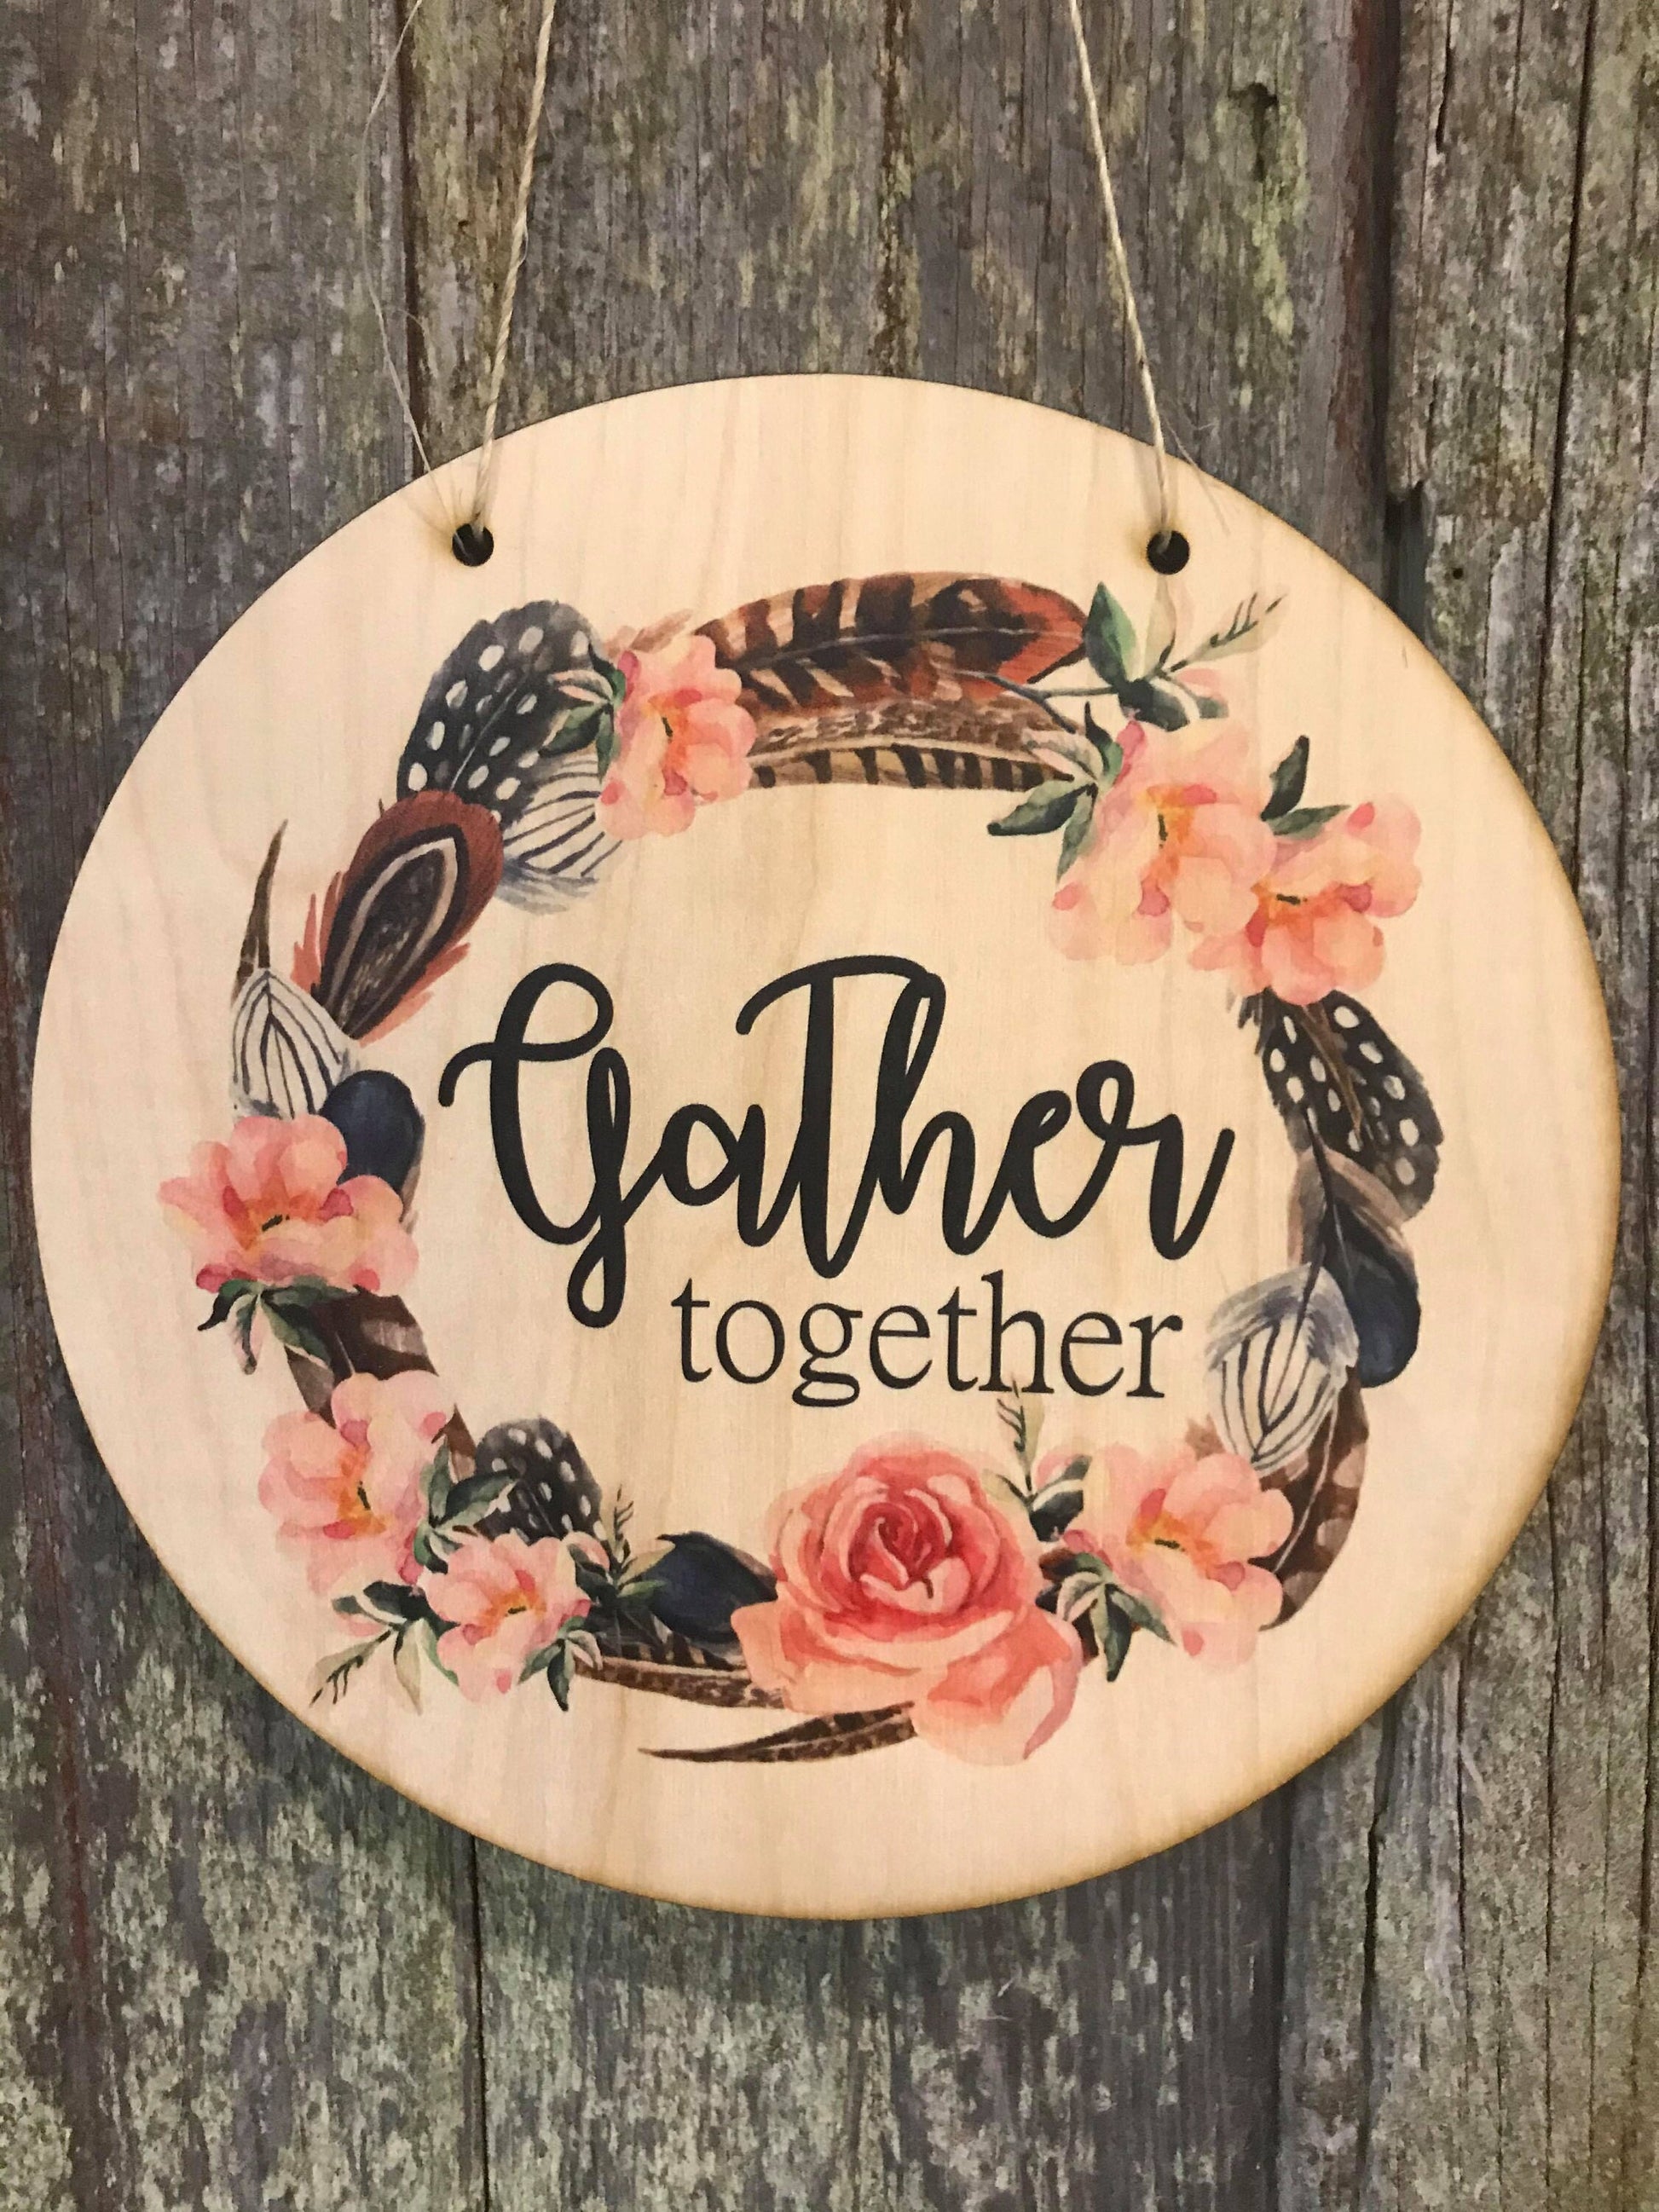 Gather Together Boho Wall Hanger Feathers Wood Door Hanger Floral Roses Round Front Door Entry Way Decor Plaque Wall Art Wood Print Script